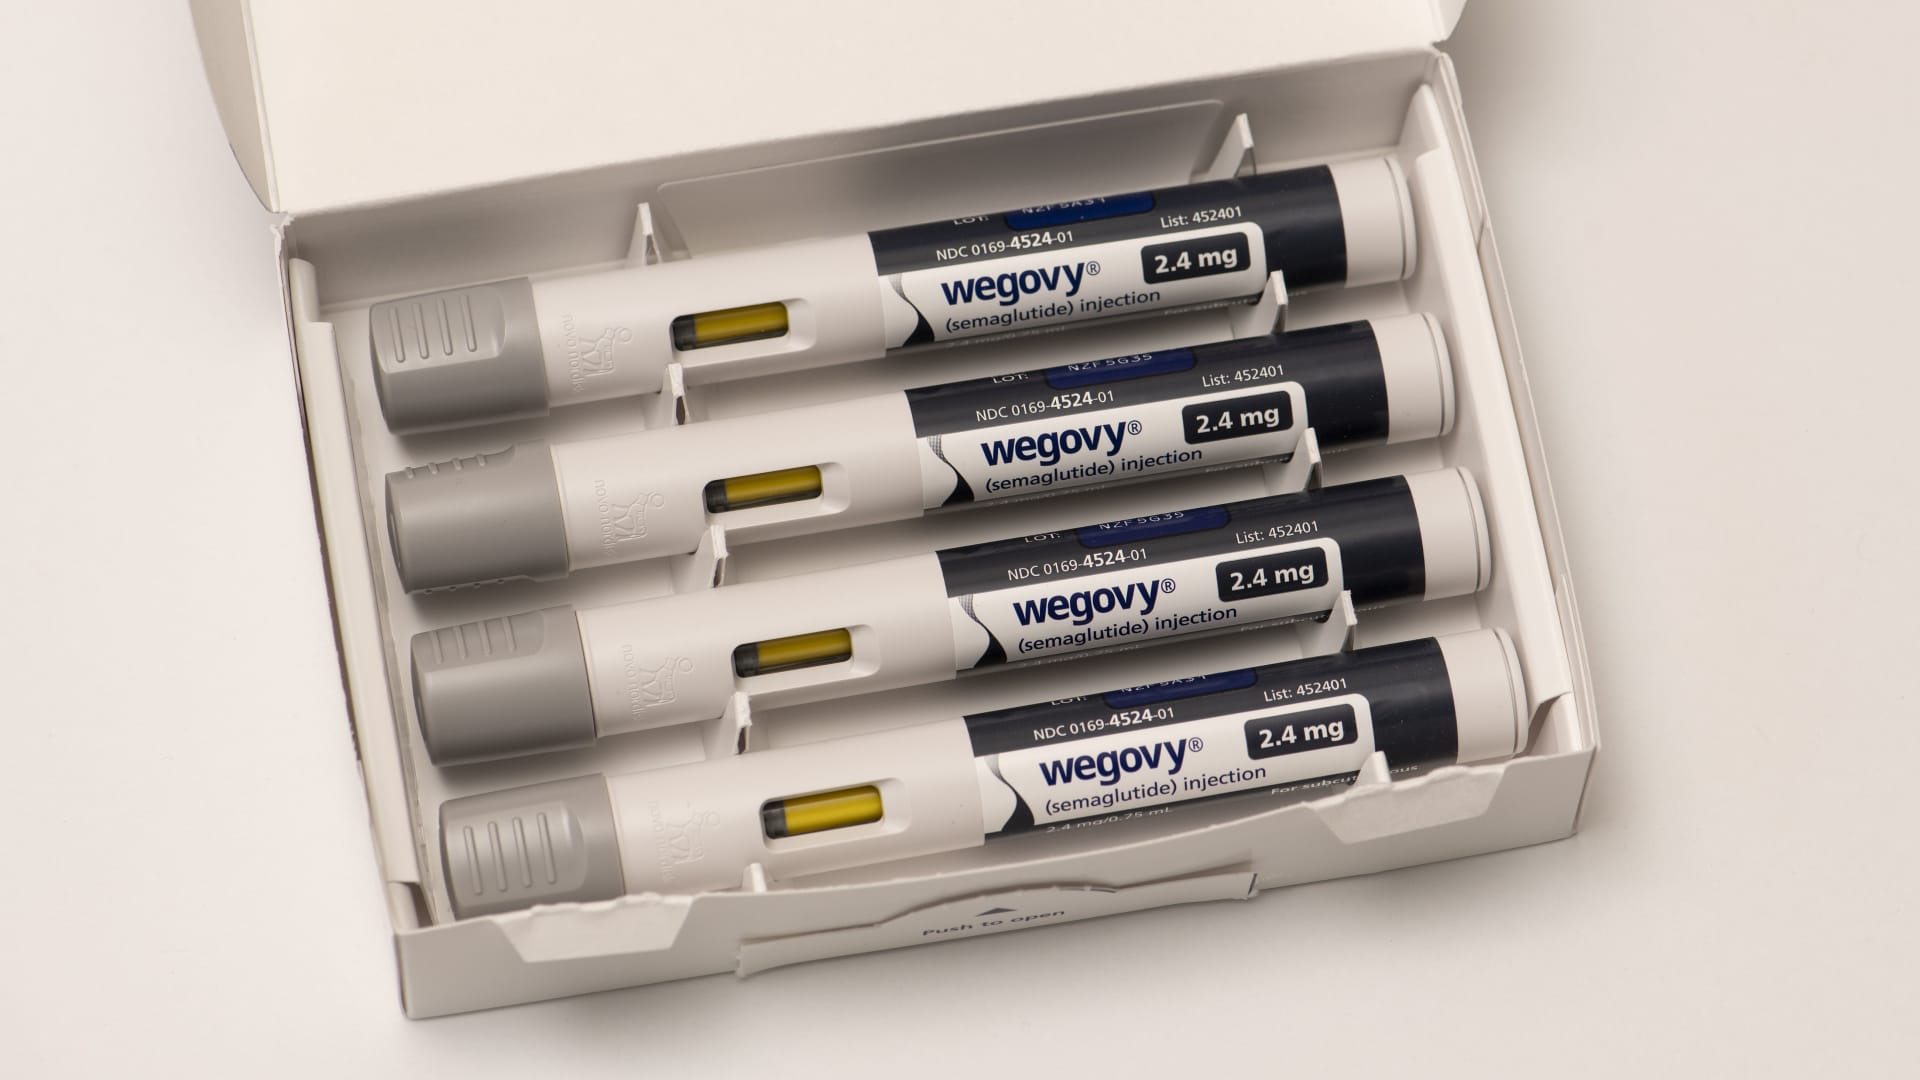 Here's what Wall Street is saying about obesity drug Wegovy following Novo Nordisk's key study